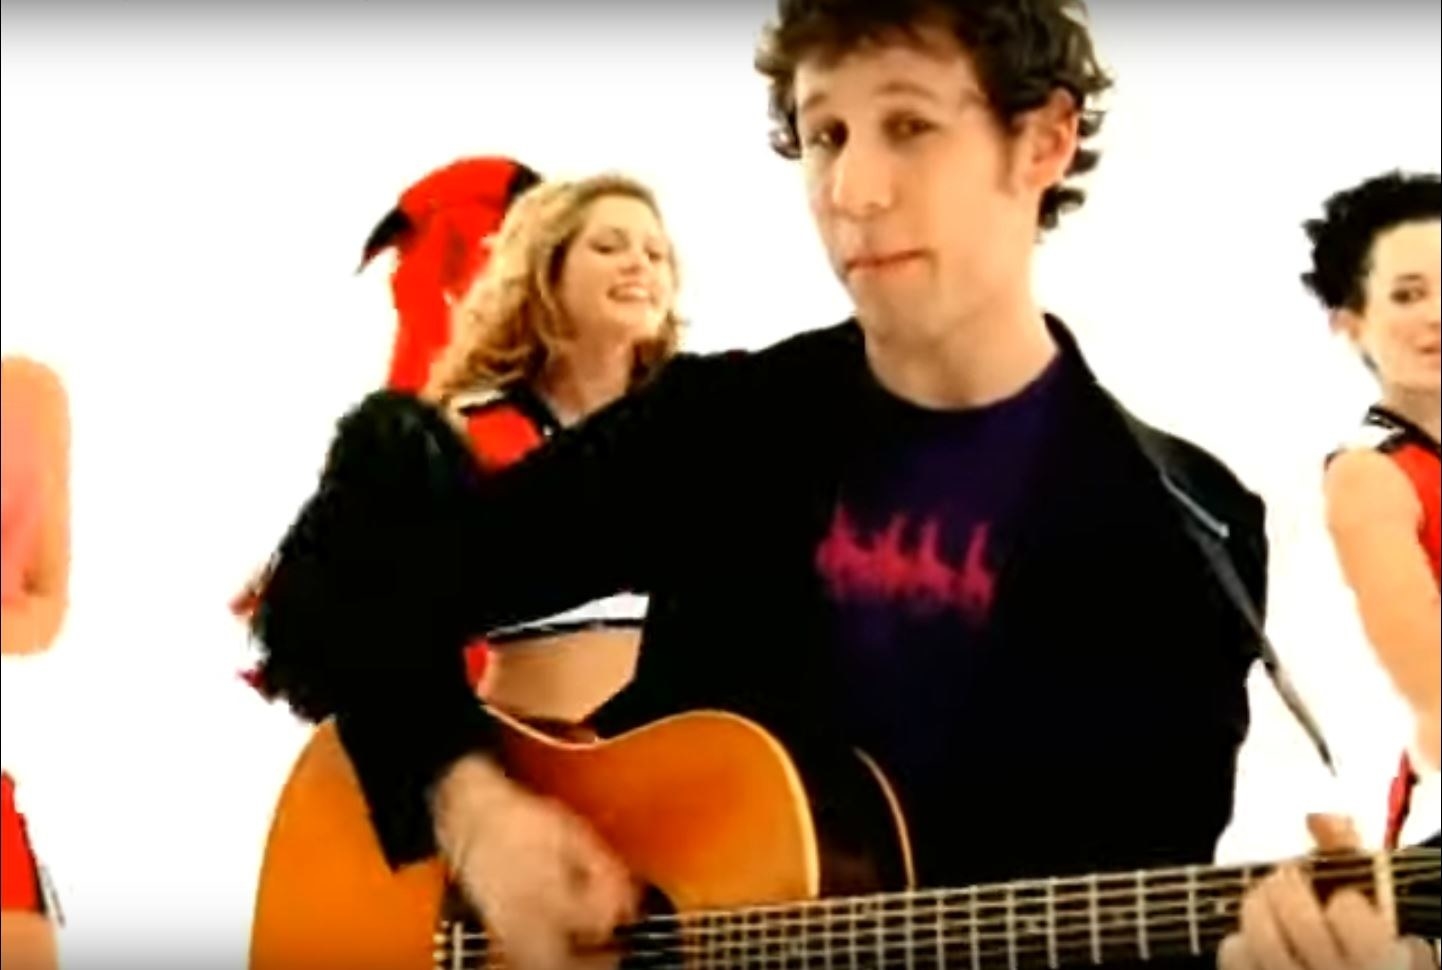 Ben Lee singing and playing his acoustic guitar in a white void as cheerleaders dance behind him